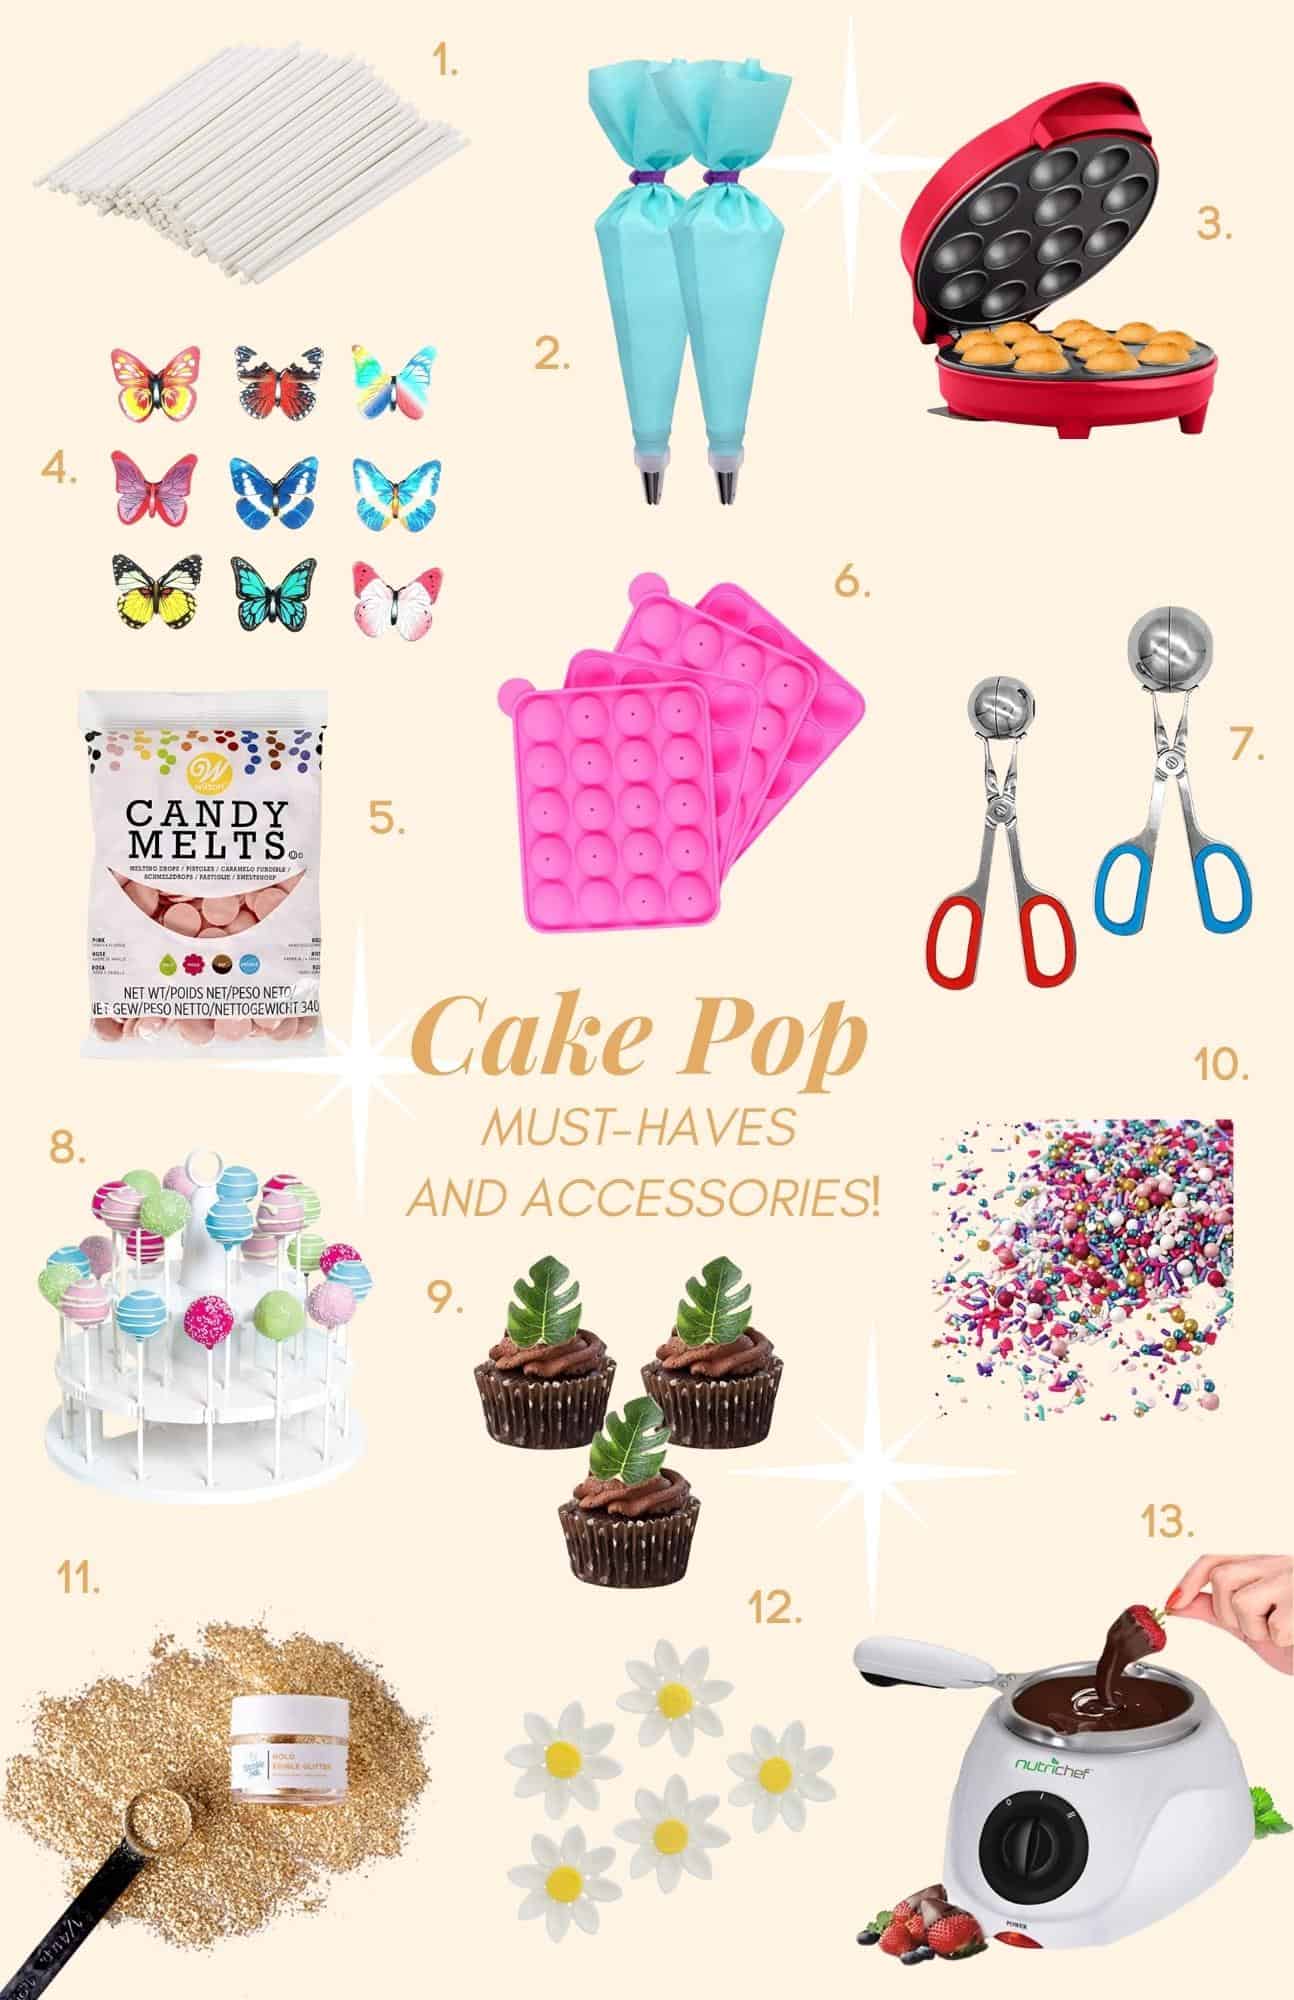 a college of cake pop must-haves and accessories